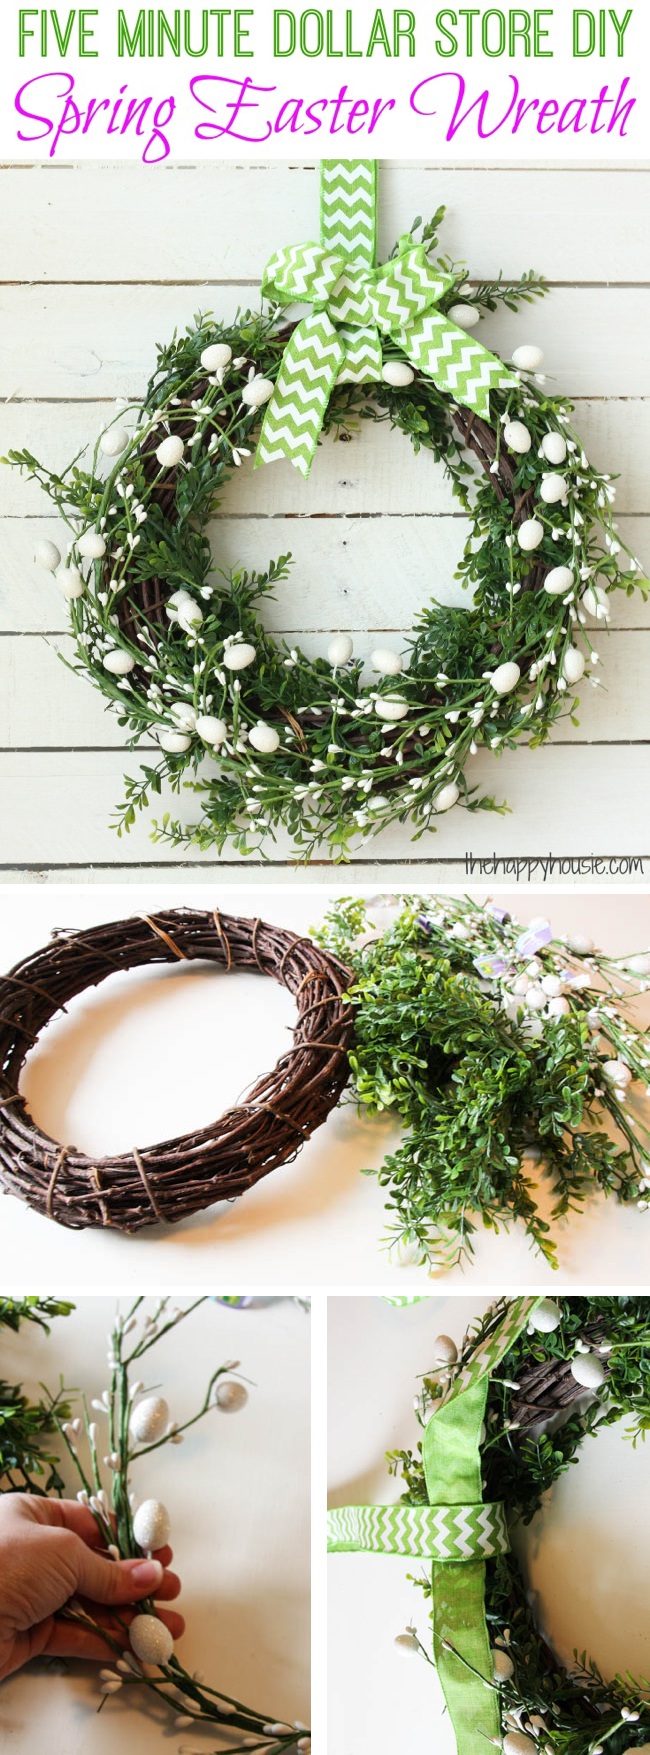 Five Minute Dollar Store DIY Spring Easter Wreath